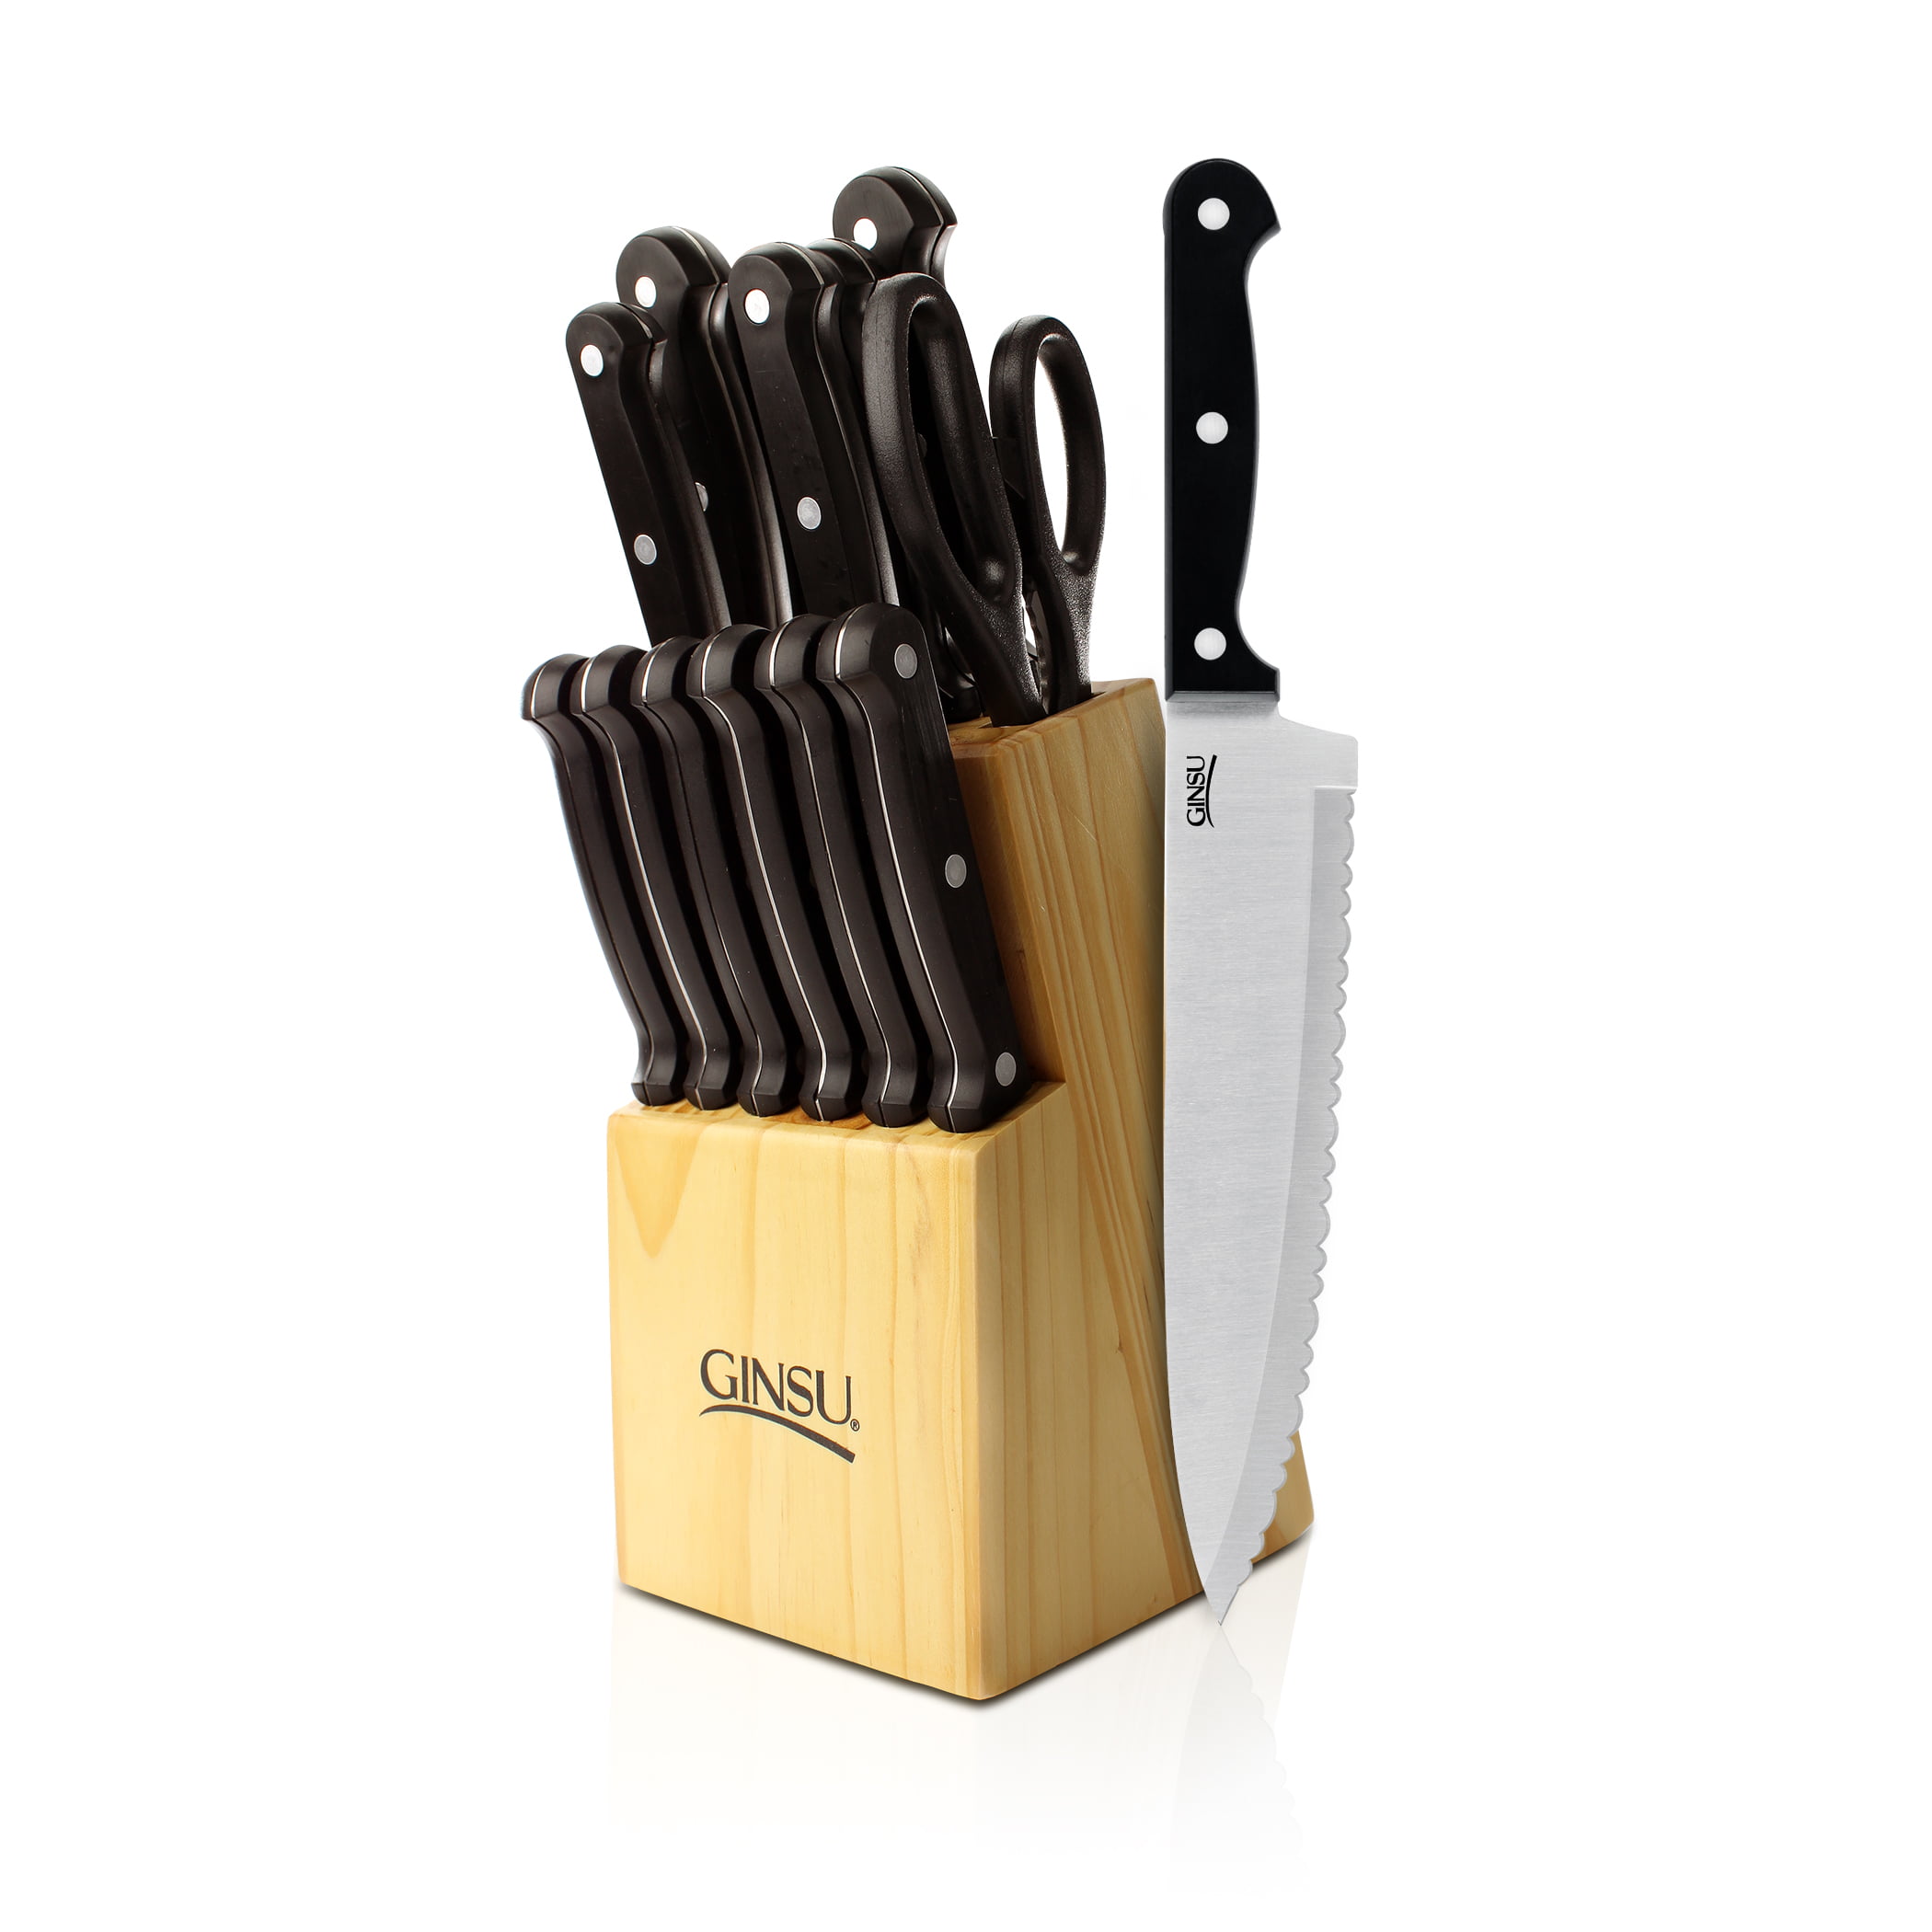 Ginsu Essential 14-Piece Stainless Steel Knife Set - Cutlery with Black Kitchen in a Natural Block, 04817DS - Walmart.com